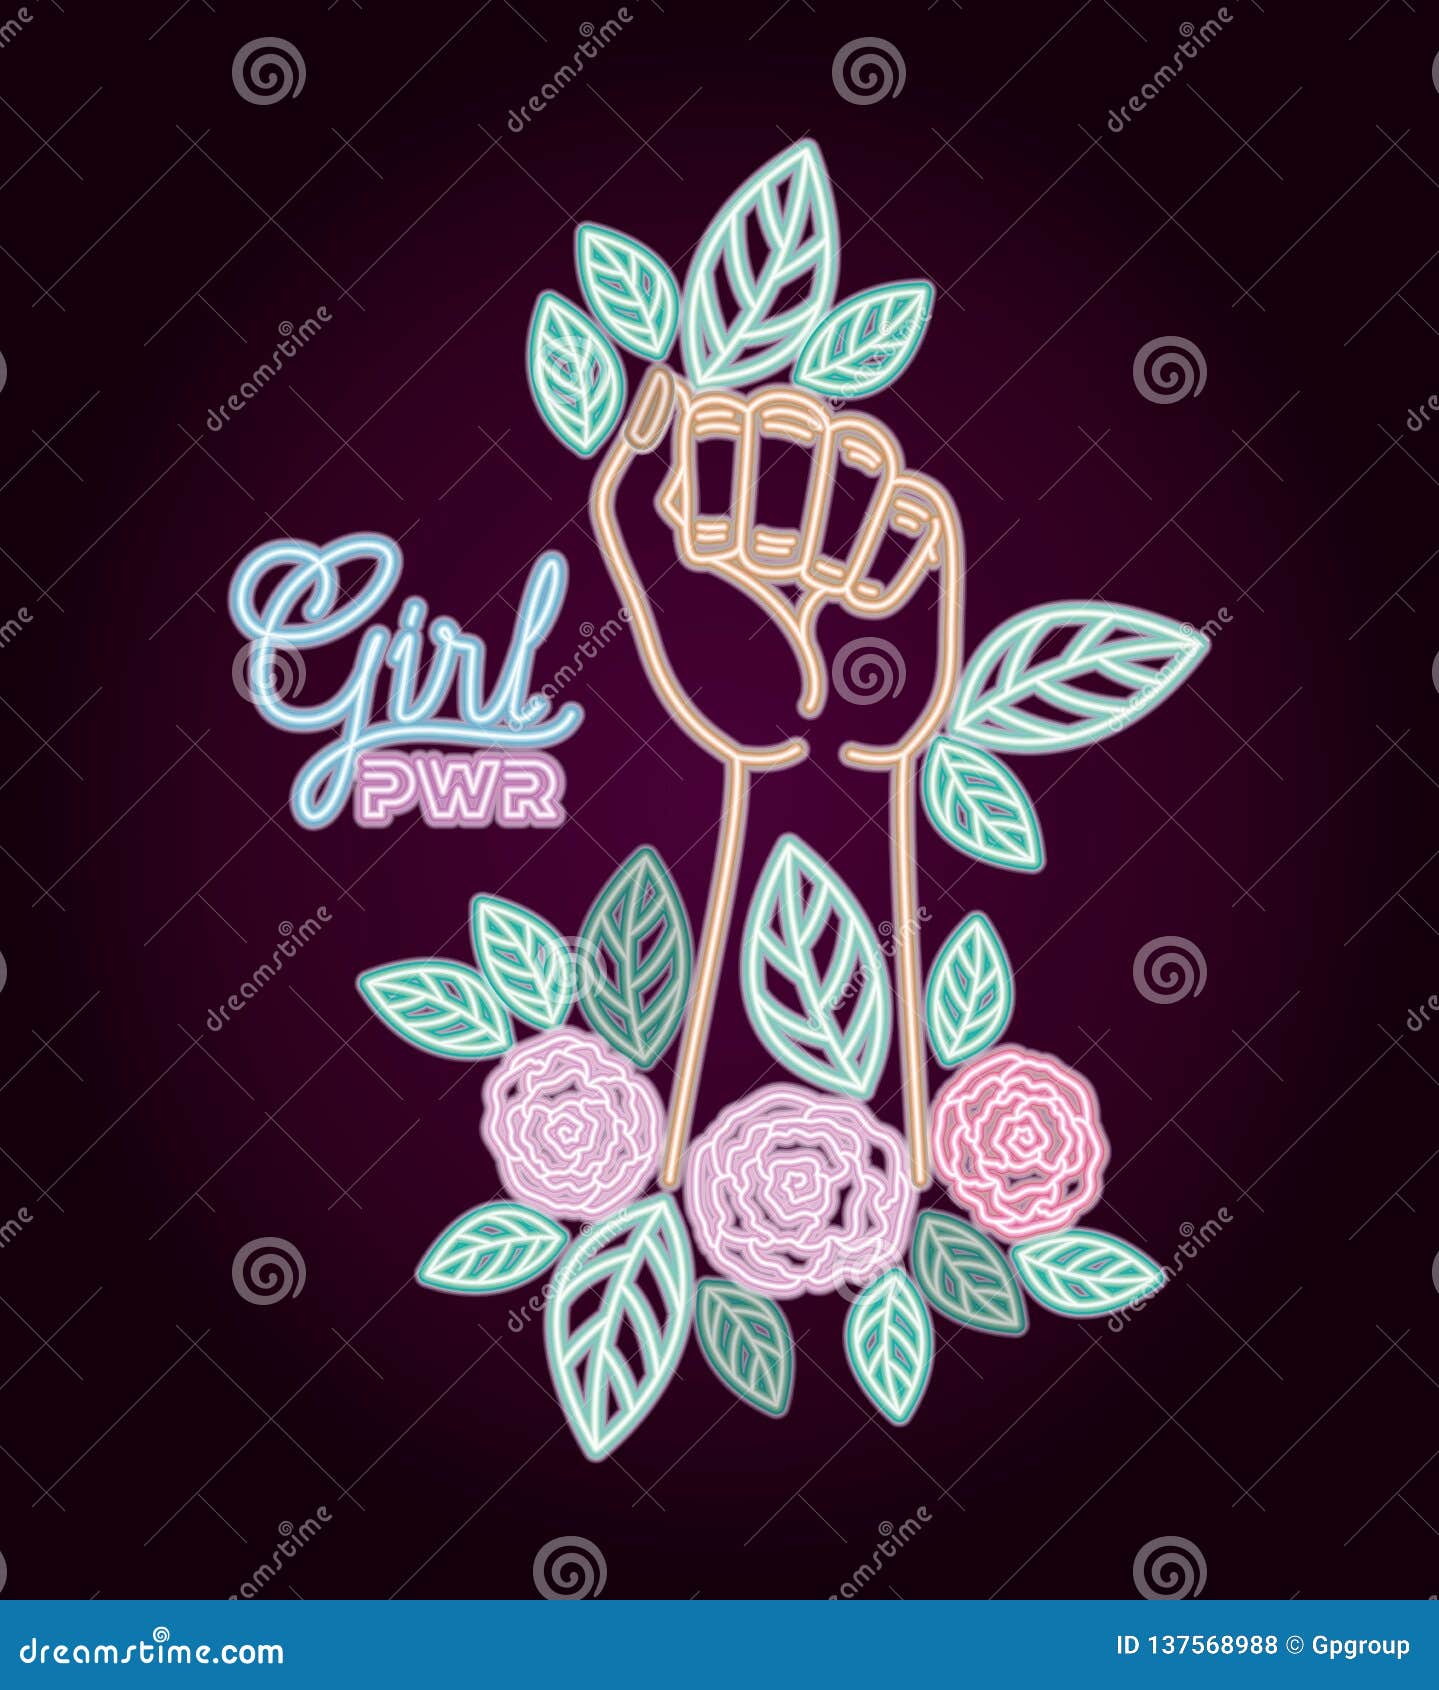 Woman Day Neon Label with Hand Fist and Roses Stock Vector ...